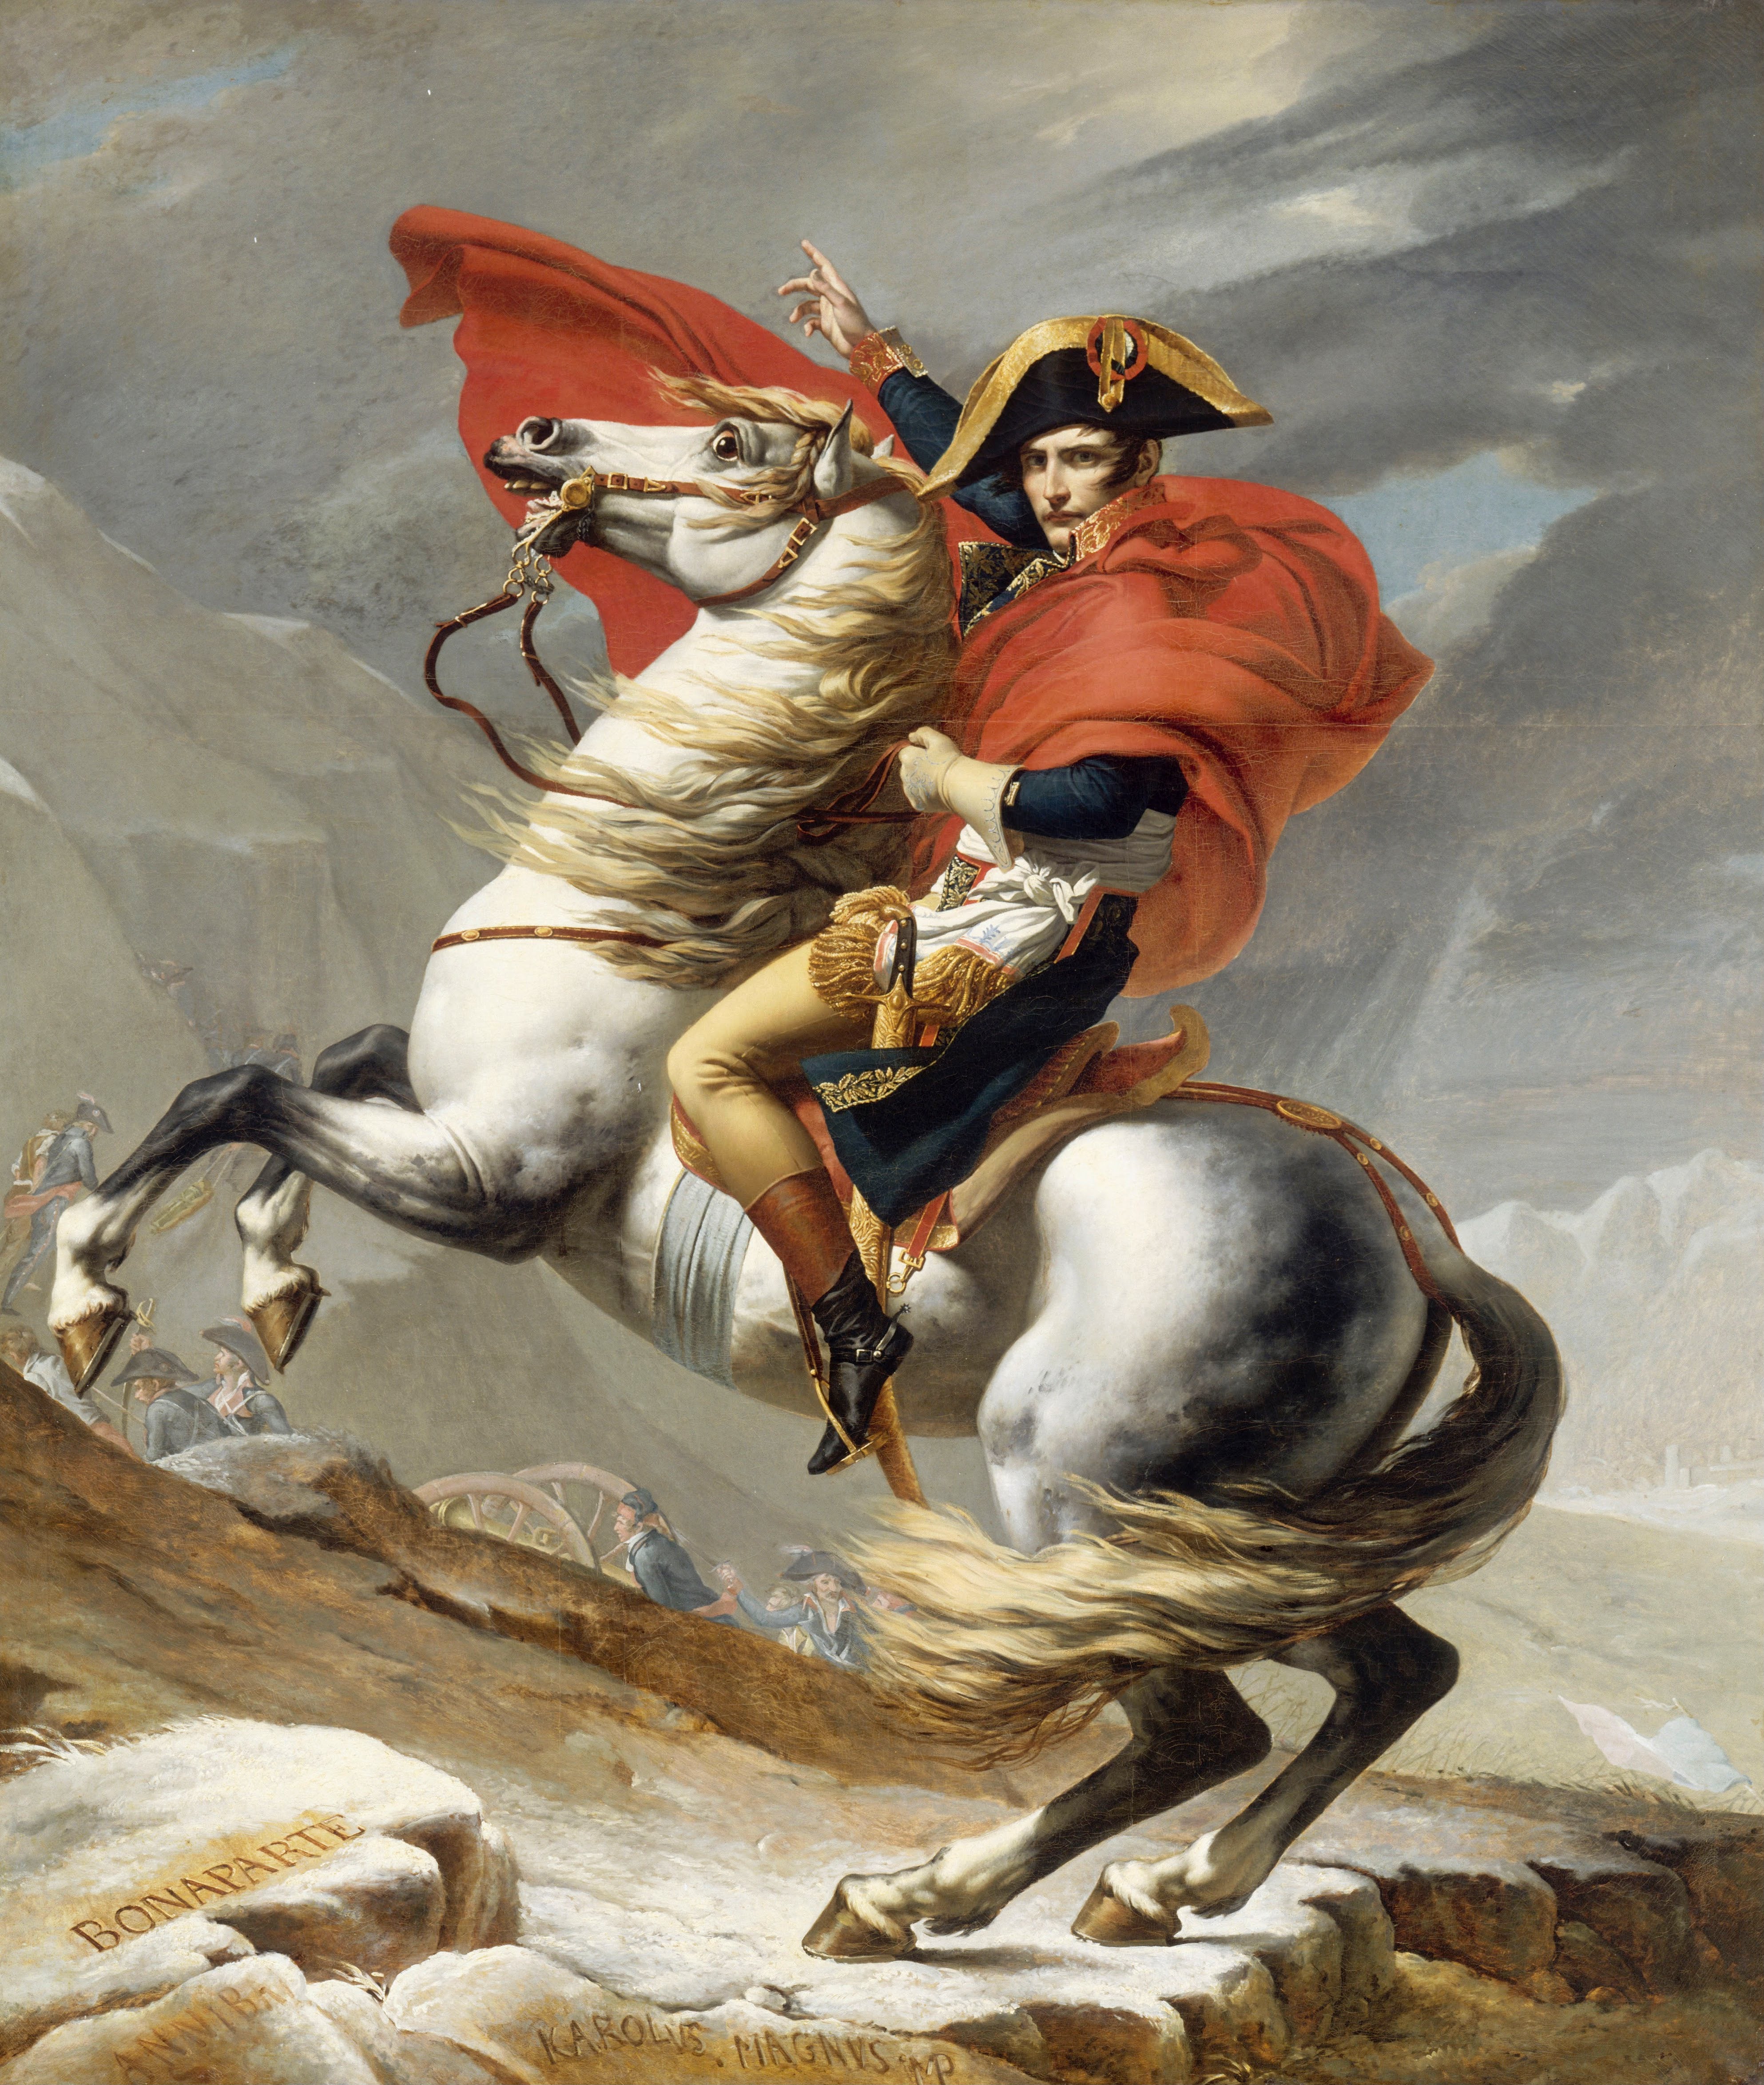 ‘Napoleon Crossing the Alps’, 1802, by French painter Jacques-Louis David